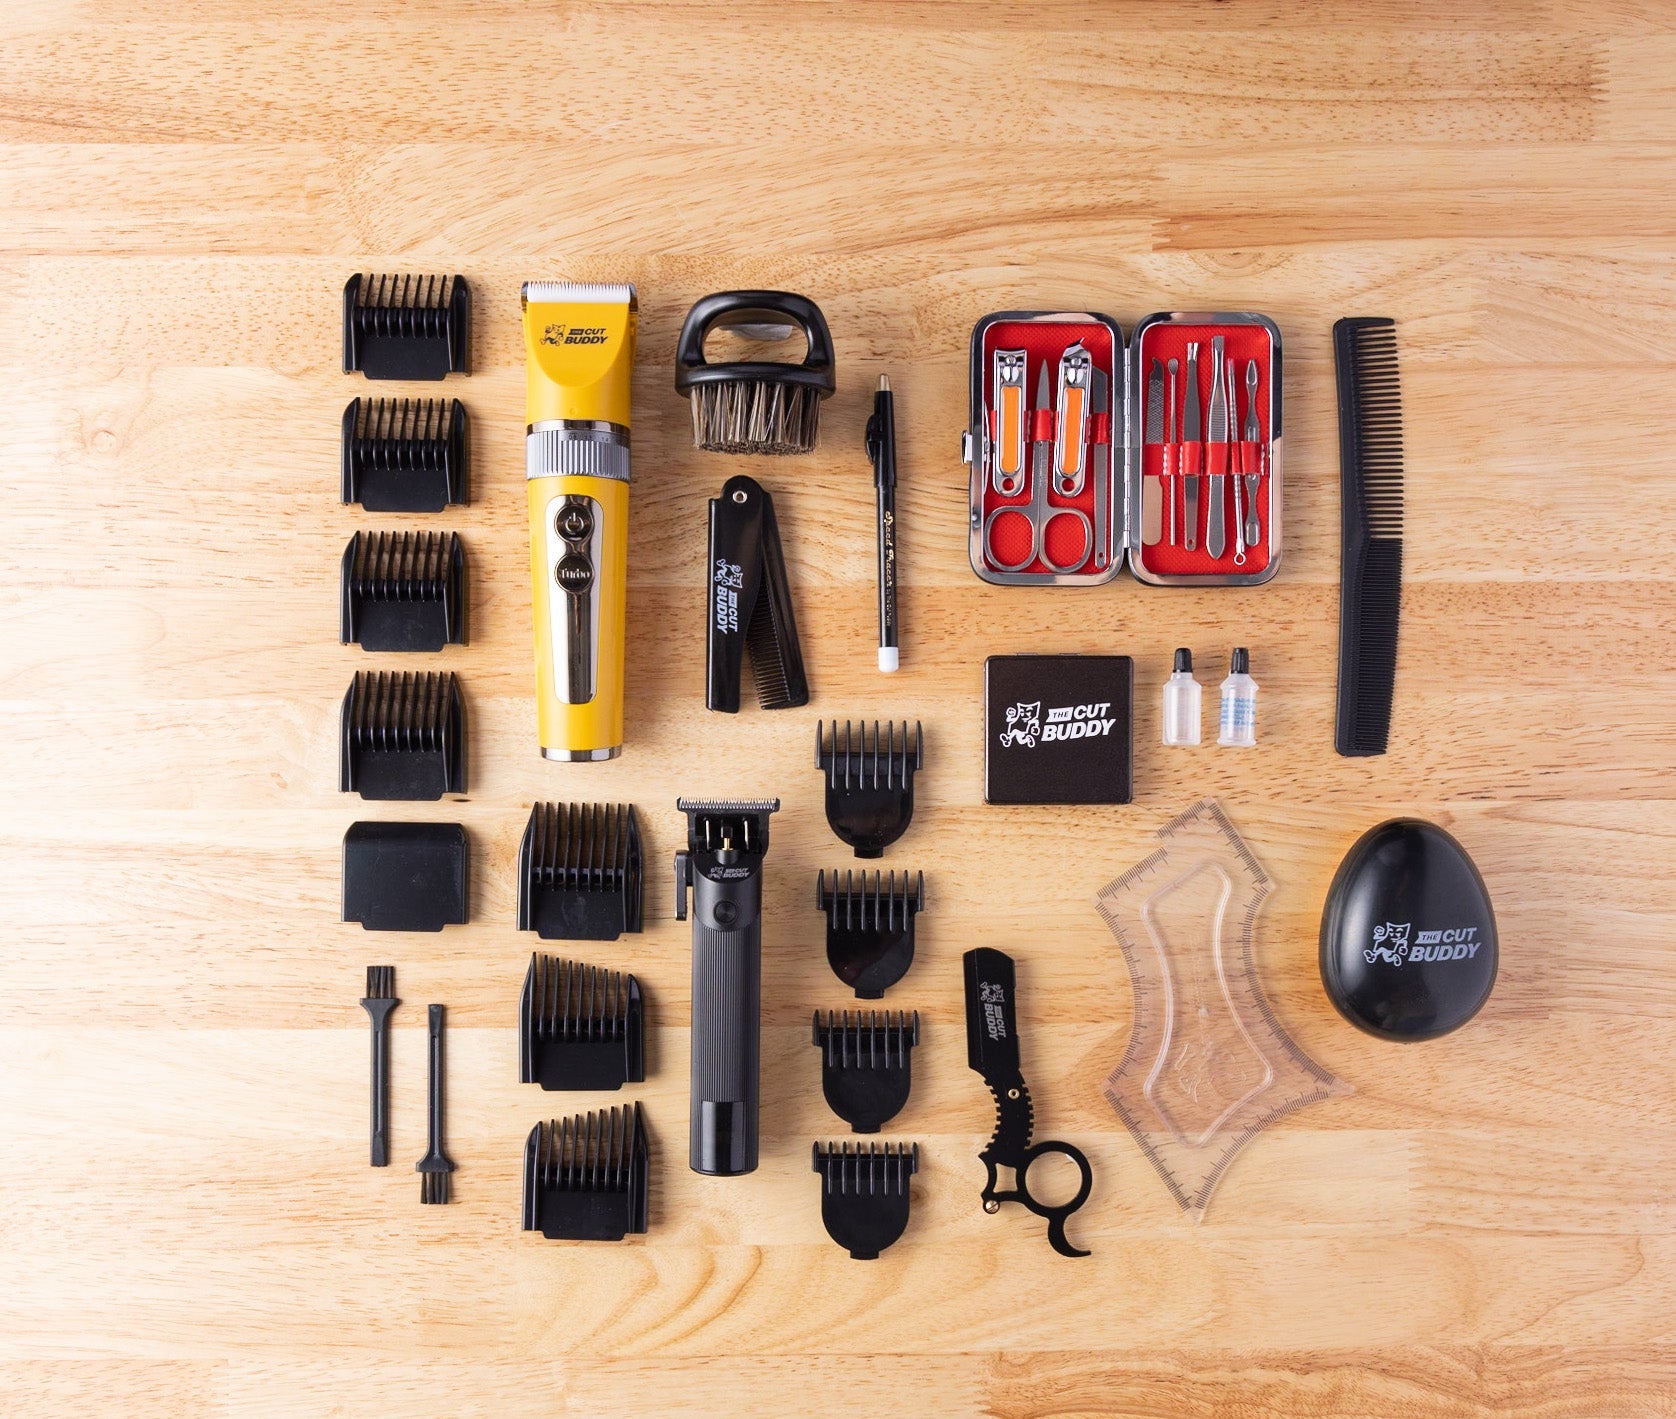 35 piece all inclusive home trimming and clipper kit from Cut Buddy displayed on wooden surface